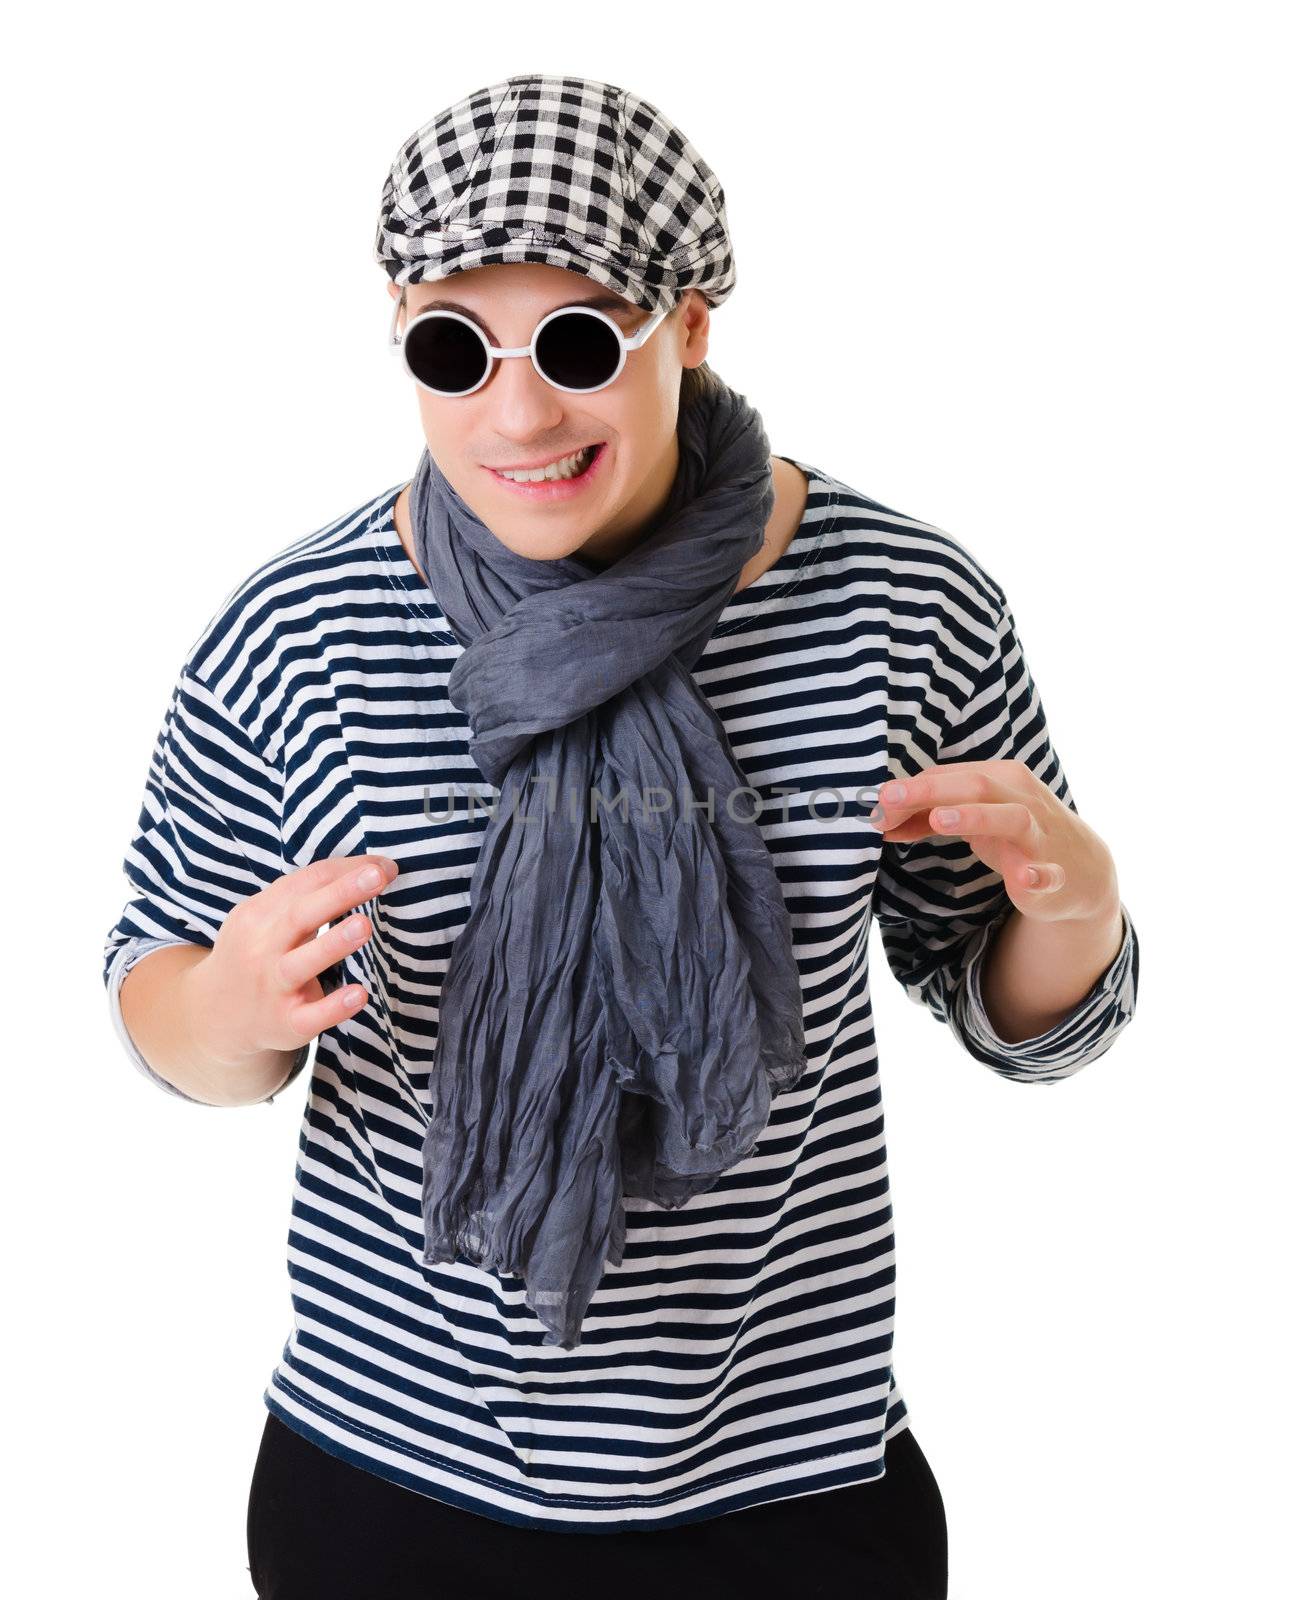 Young suspicious looking stylish twister man in striped clothes isolated on white background